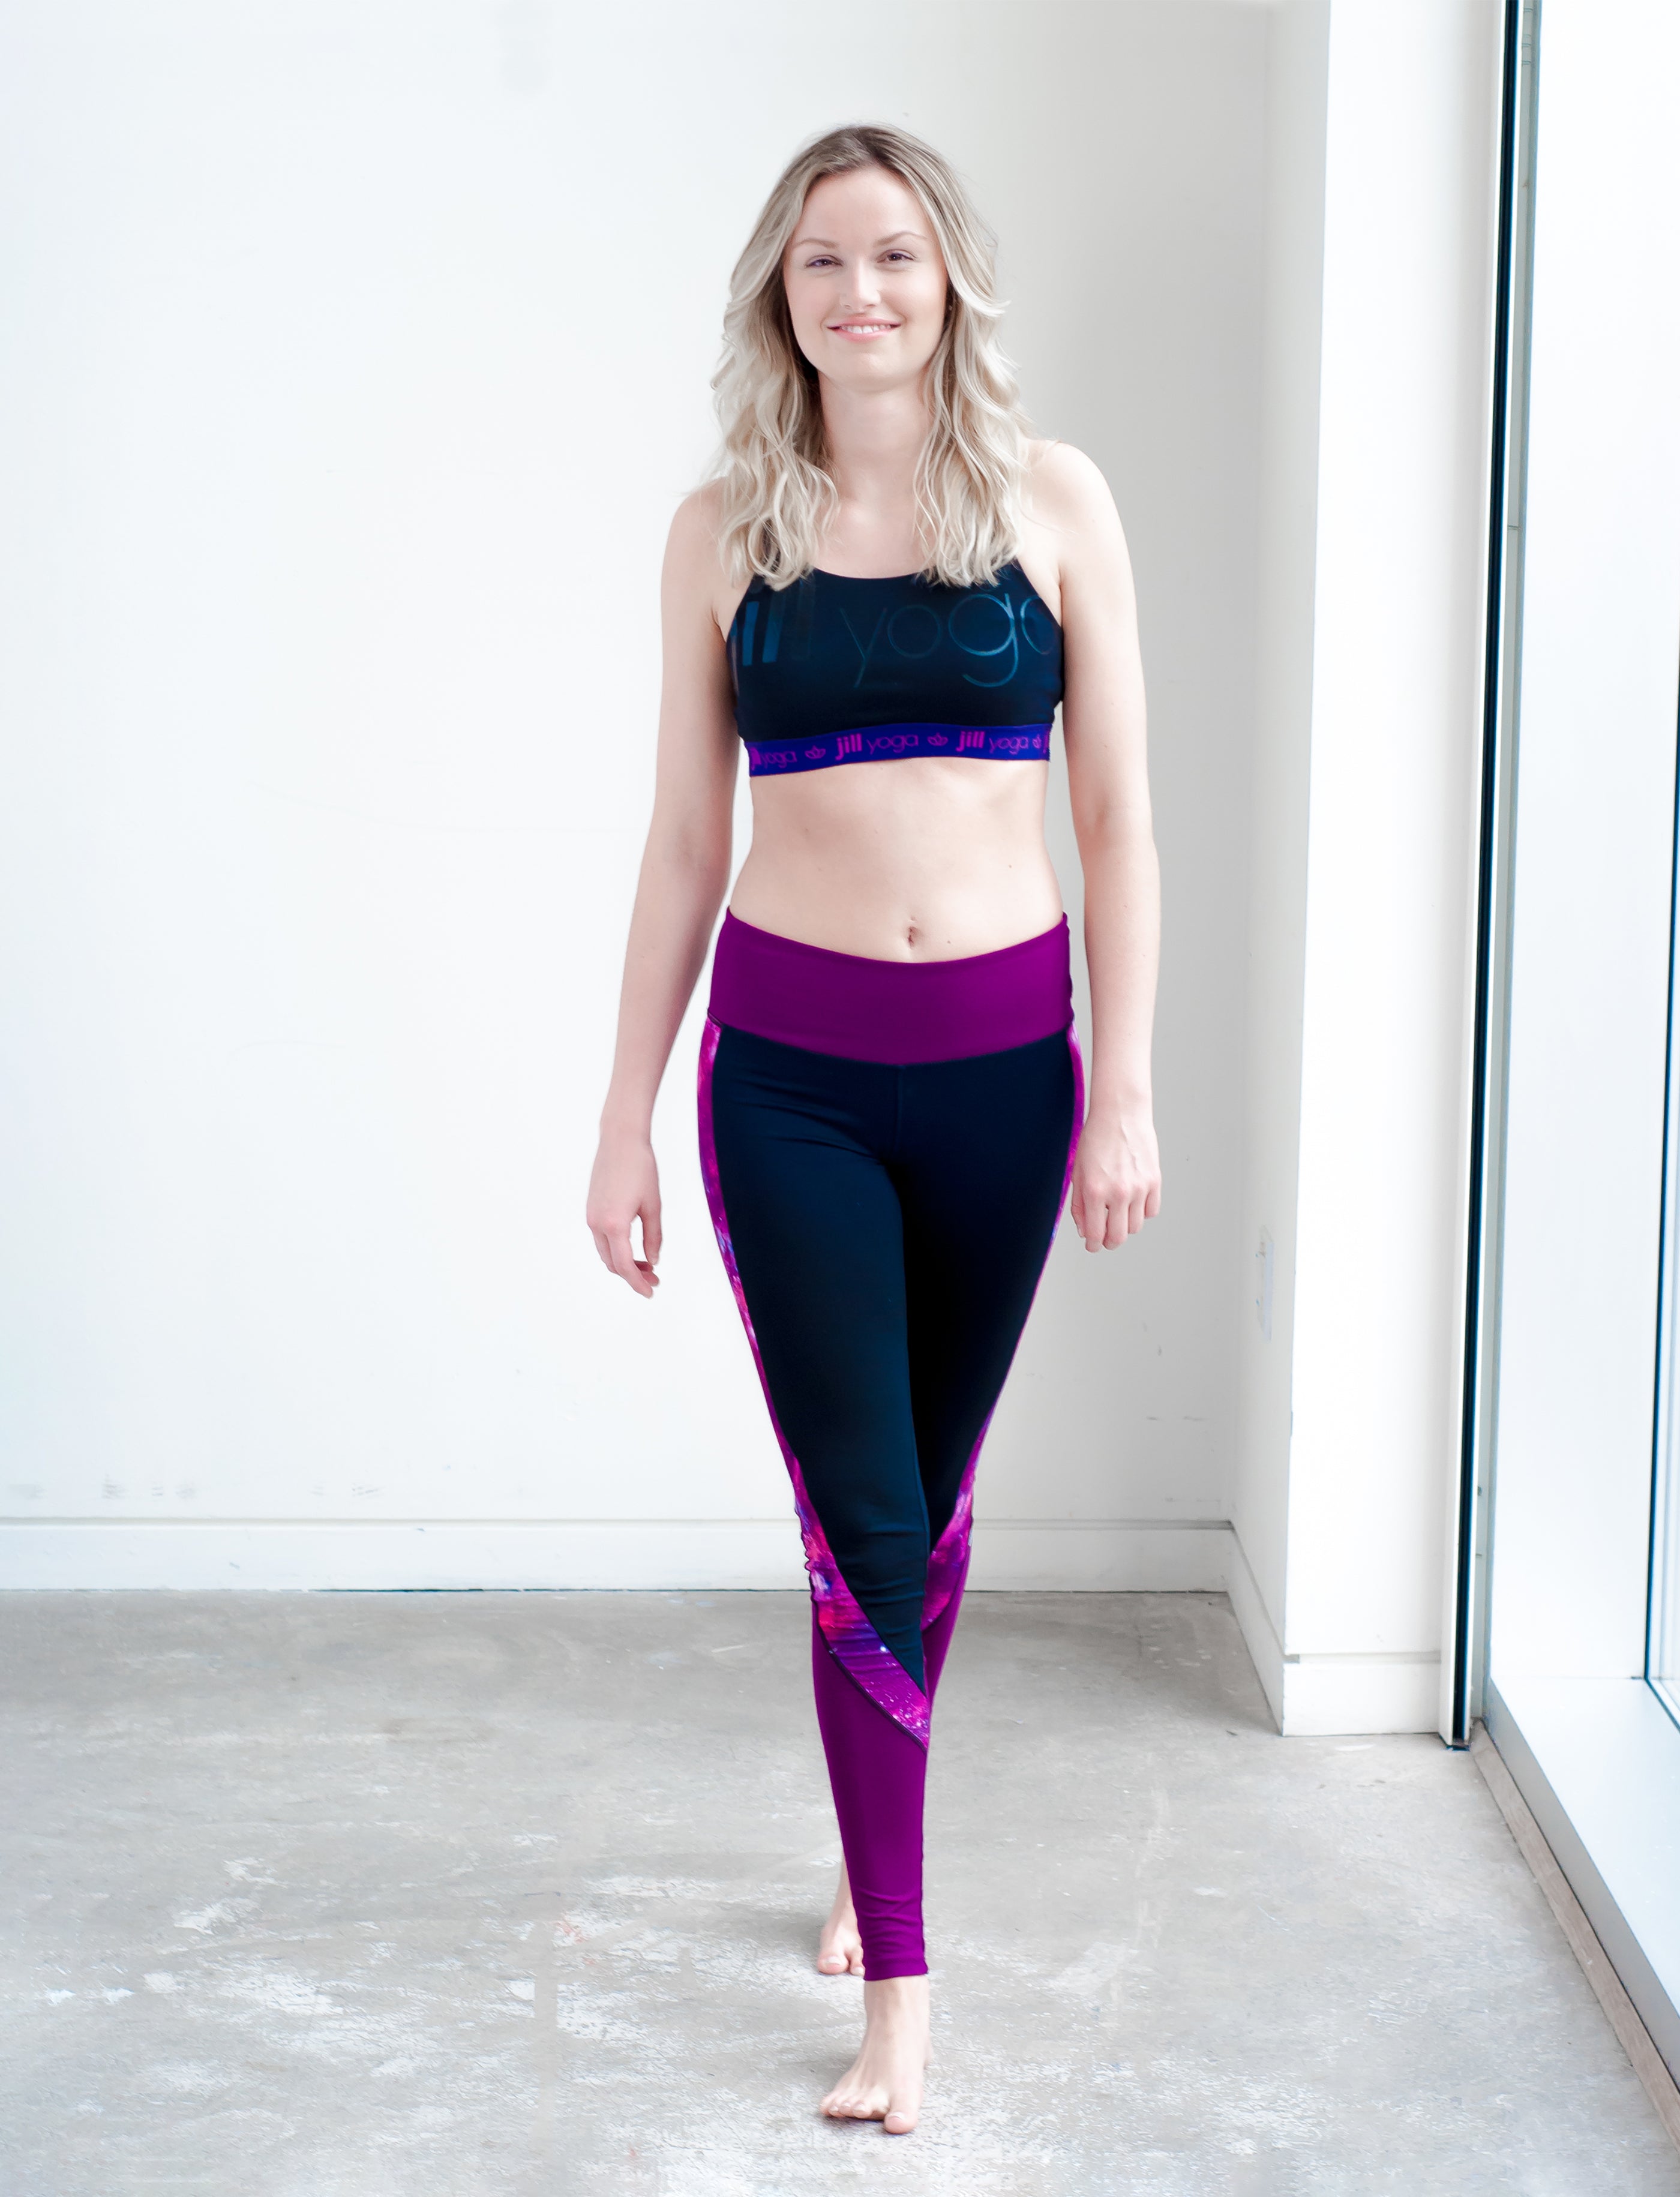 Jill Yoga: Fitness Gear For Active Girls @jillyoga_com - Lady and the Blog